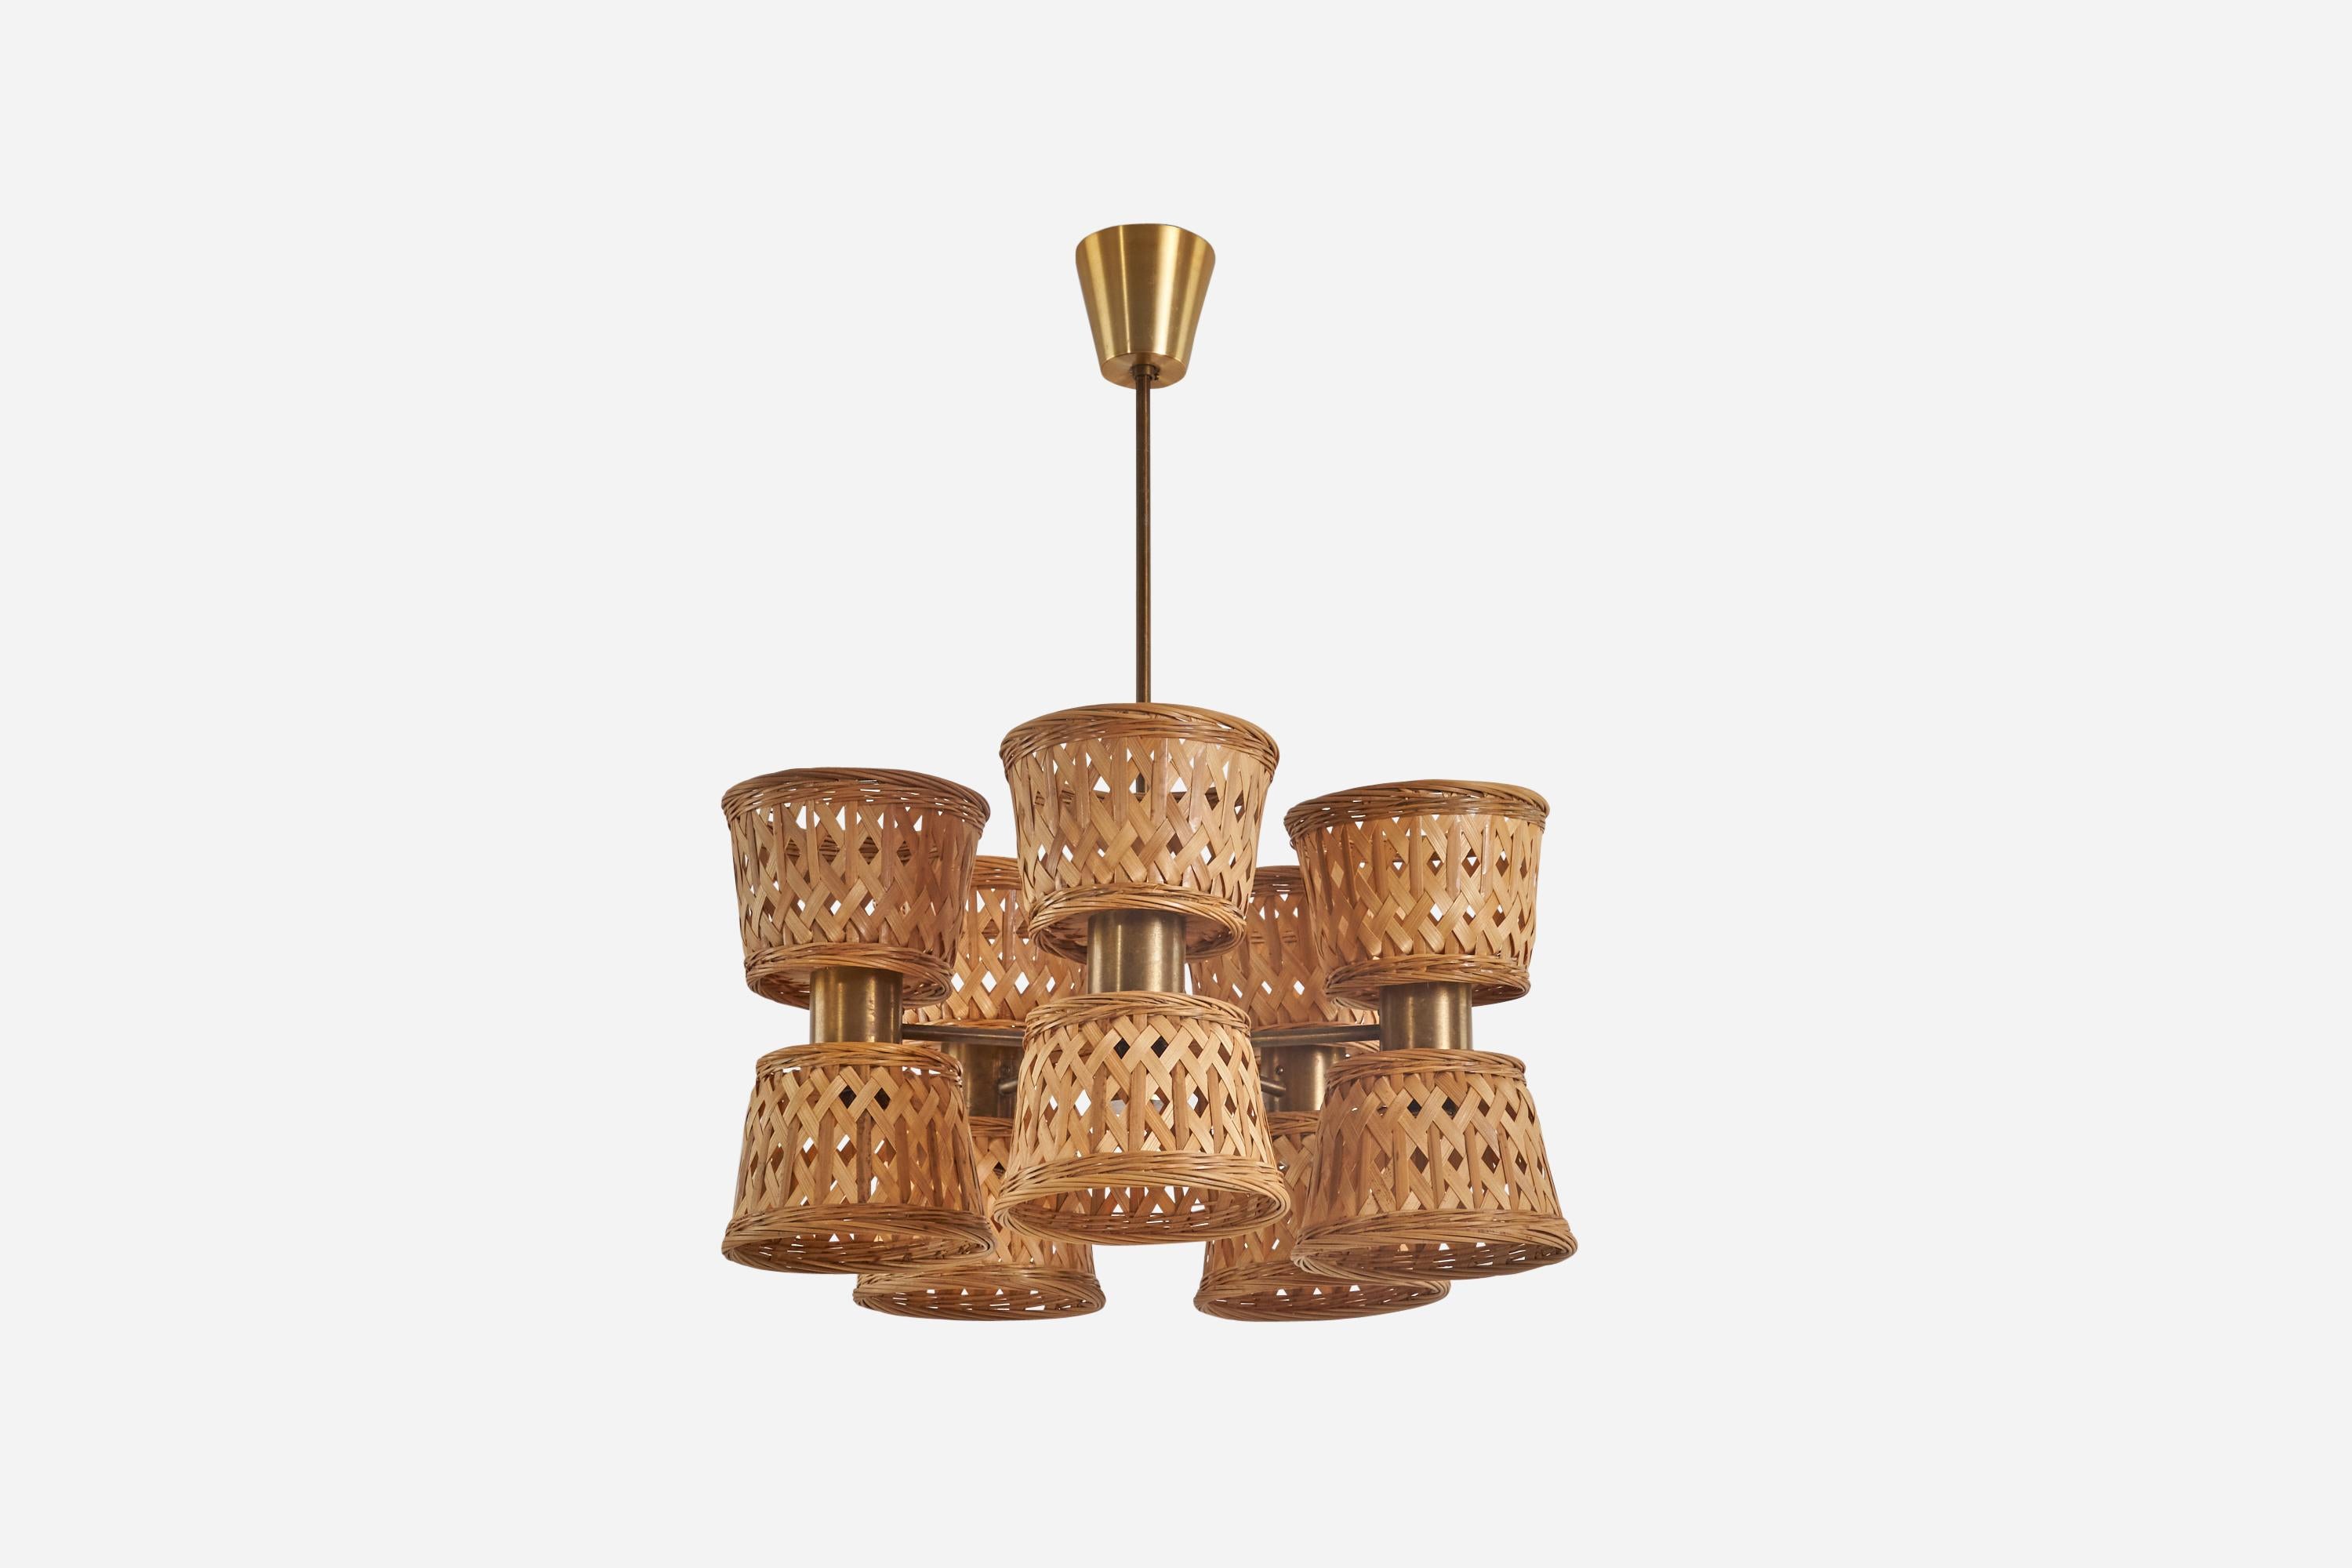 A brass and rattan chandelier designed and produced by a Swedish designer, Sweden, 1950s.

Sold with Lampshade(s). Dimensions stated are of Chandelier with Shade(s).

Socket takes E-14 bulb.

There is no maximum wattage stated on the